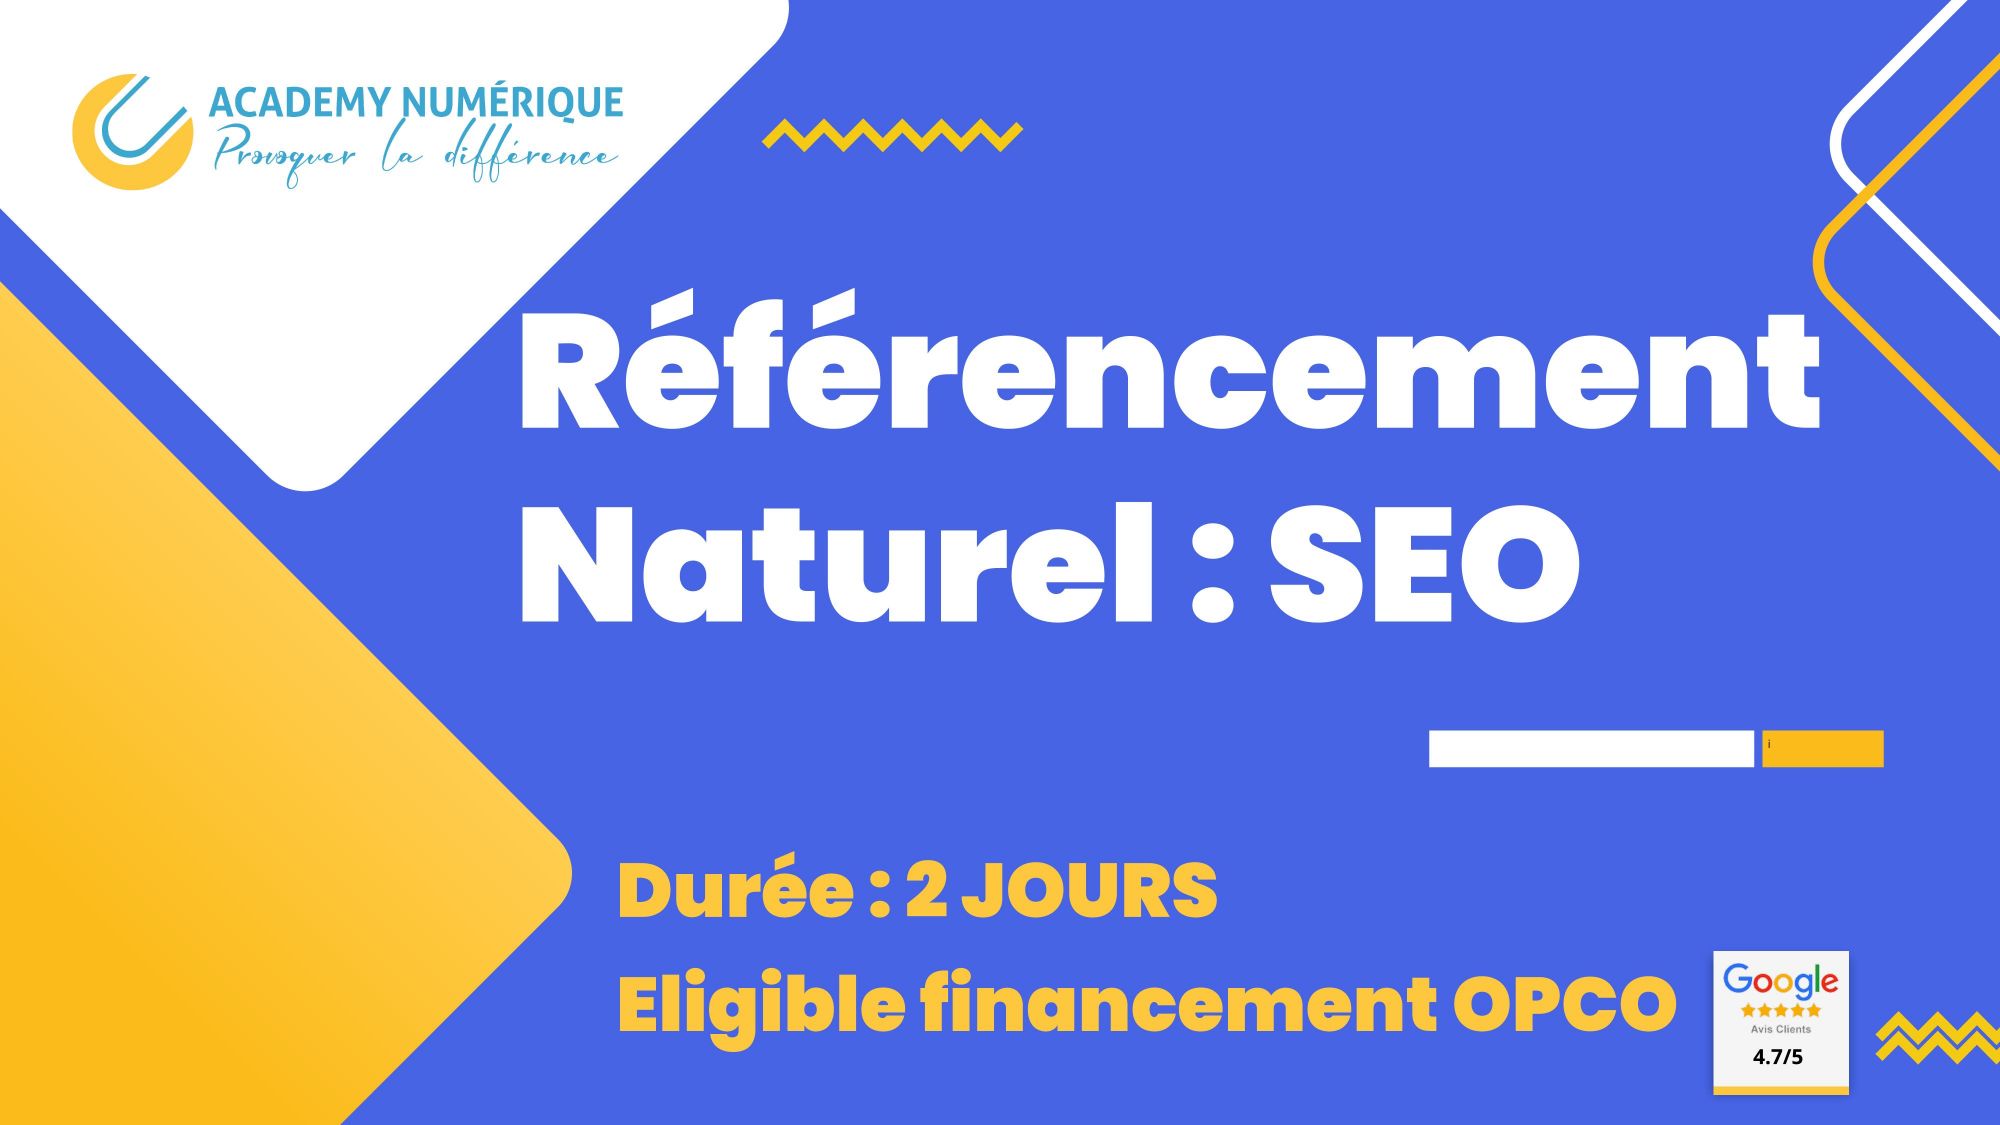 Formation-Referencement-Naturel-SEO